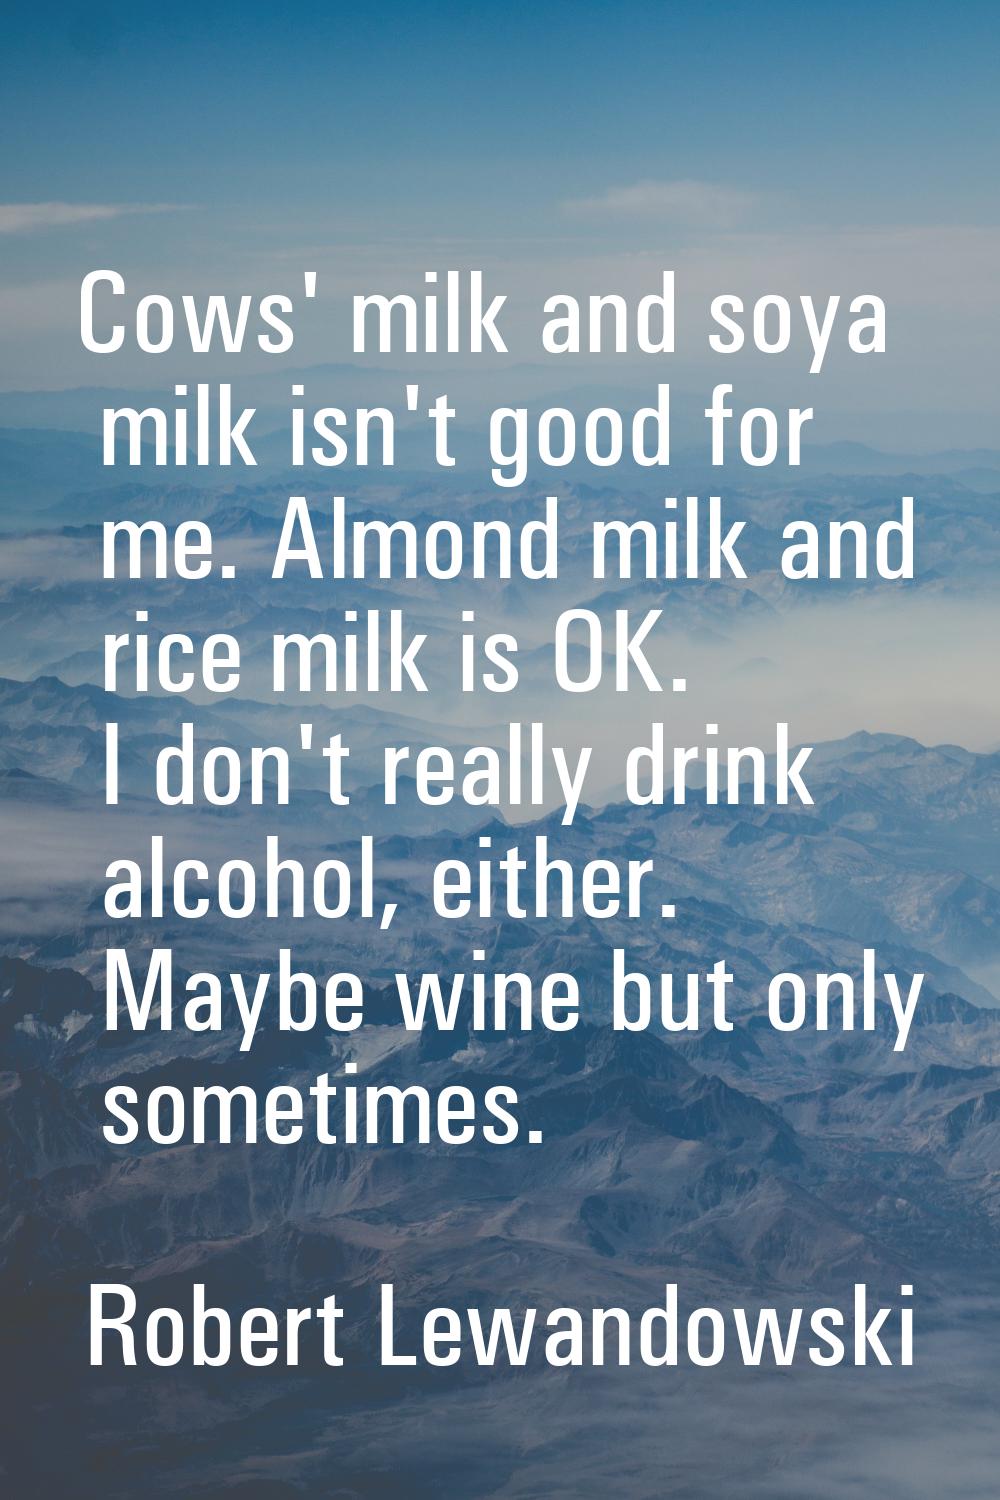 Cows' milk and soya milk isn't good for me. Almond milk and rice milk is OK. I don't really drink a